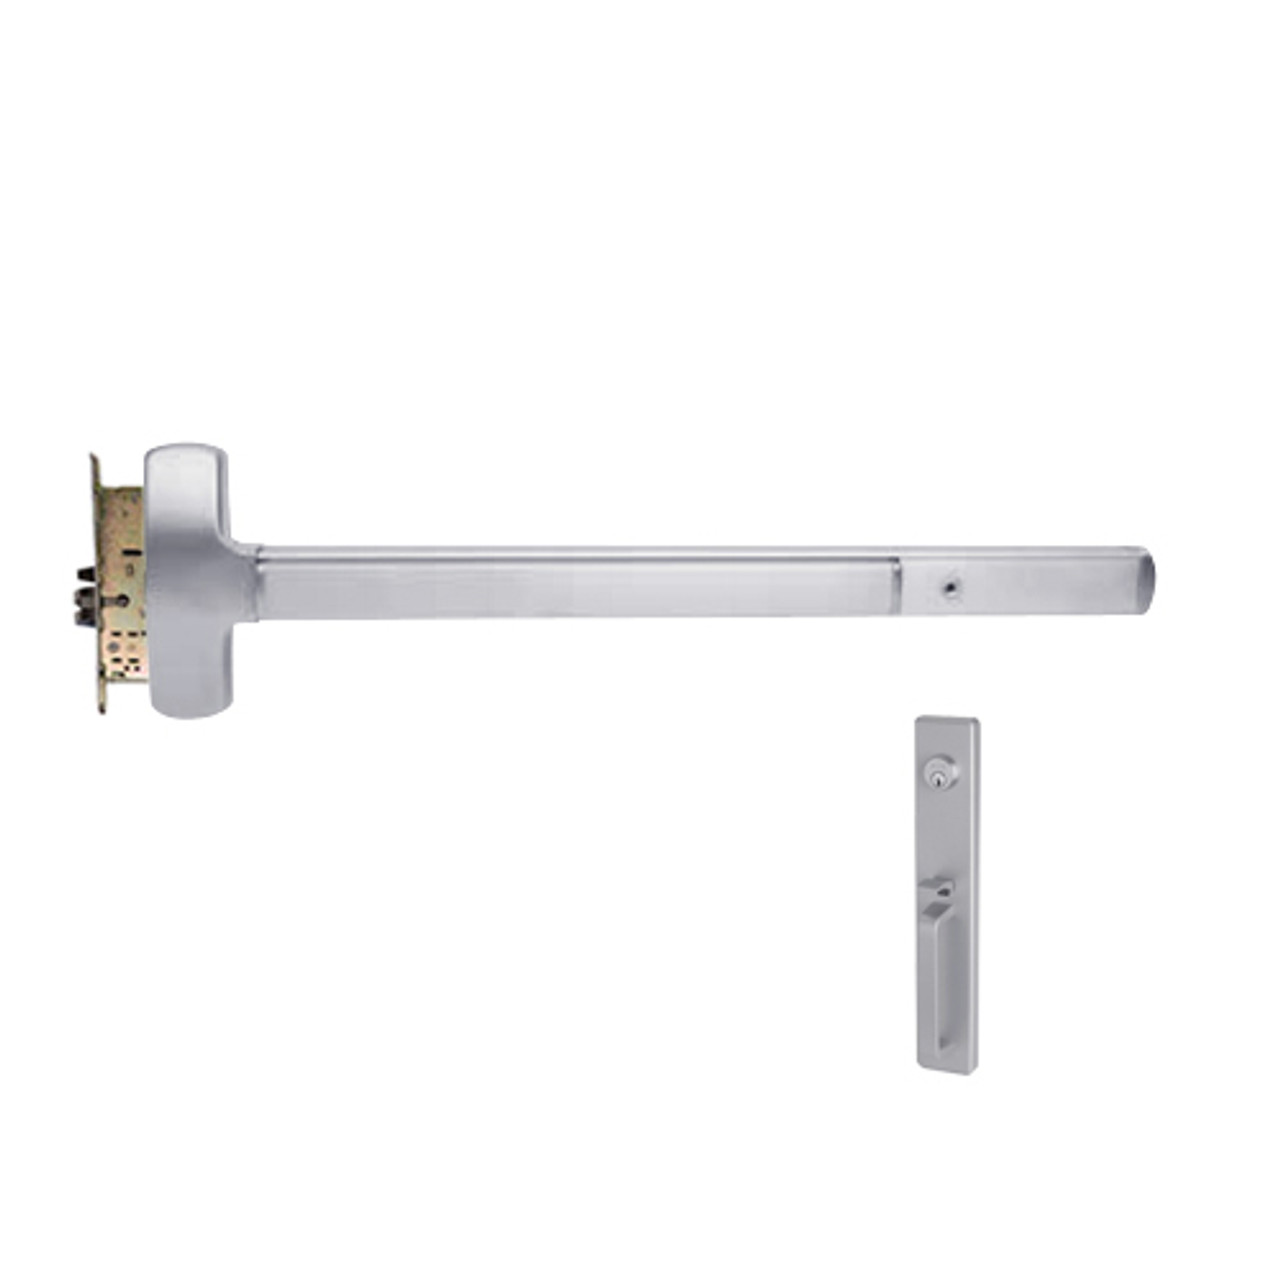 25-M-TP-US32-3-RHR Falcon Exit Device in Polished Stainless Steel